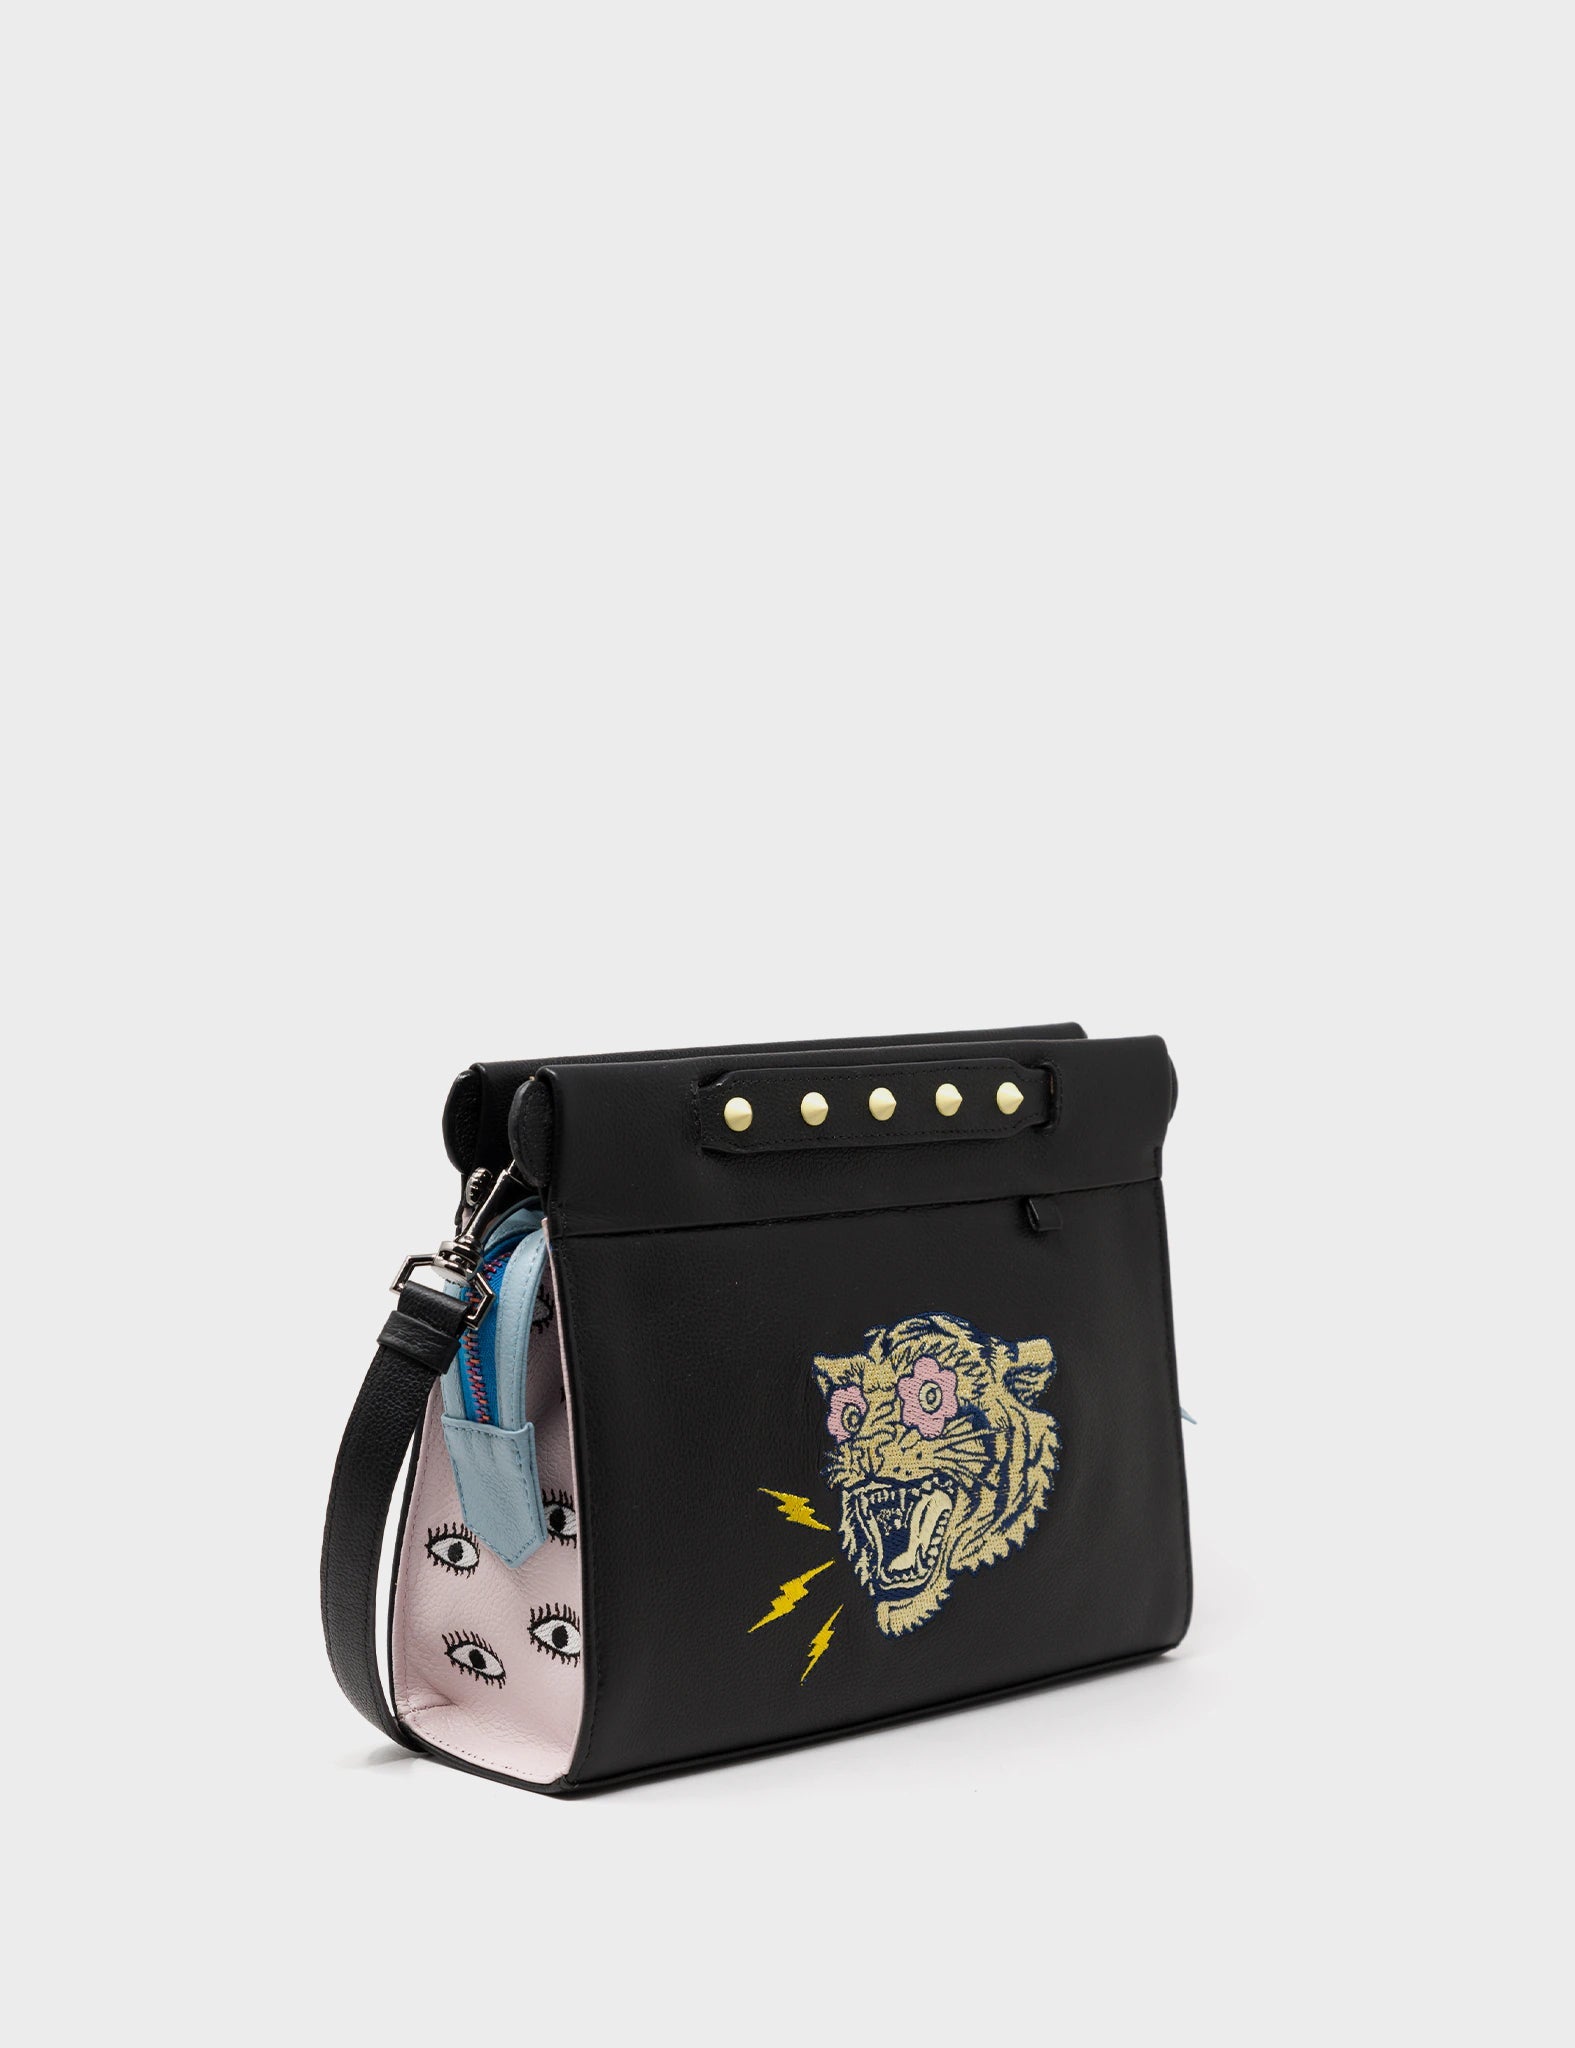 Crossbody Black Leather bag Herocity Tiger Face Comic Style Embroidery